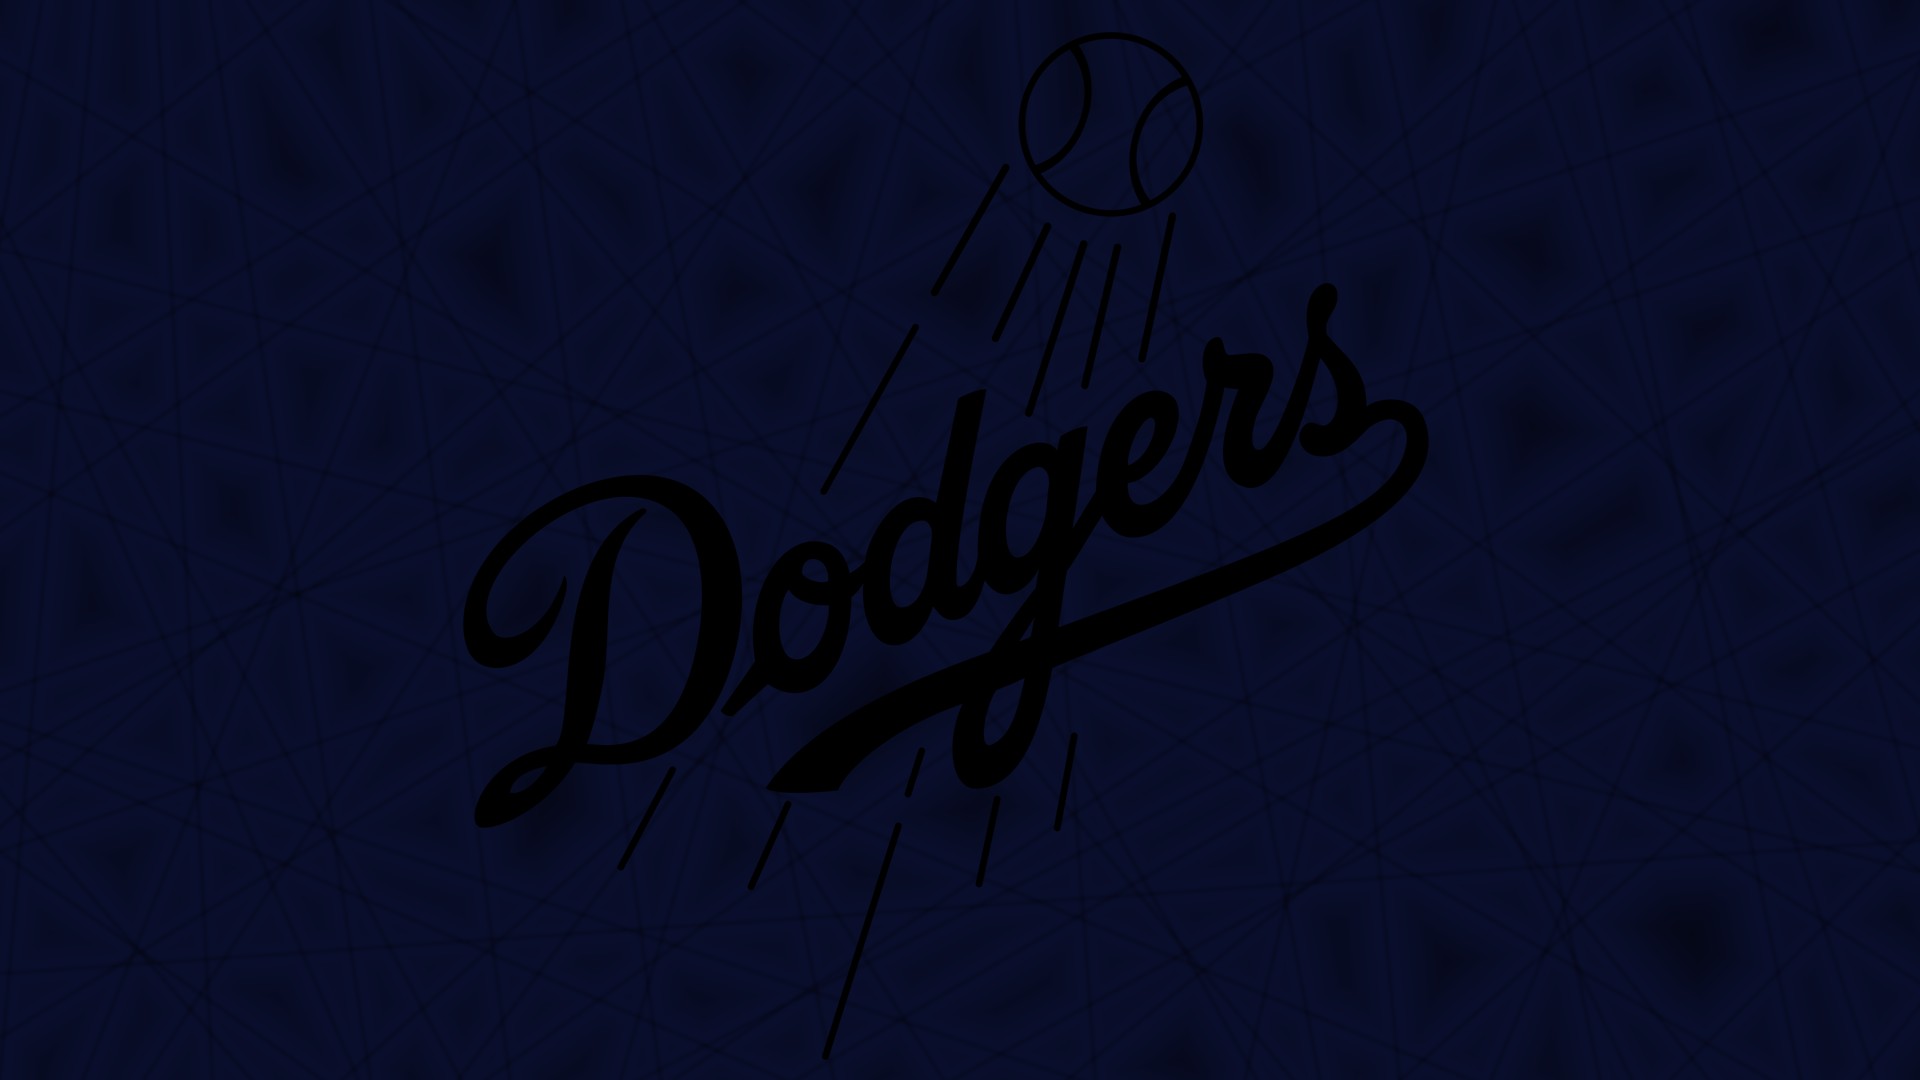 Wallpapers Los Angeles Dodgers MLB With high-resolution 1920X1080 pixel. You can use this wallpaper for Mac Desktop Wallpaper, Laptop Screensavers, Android Wallpapers, Tablet or iPhone Home Screen and another mobile phone device